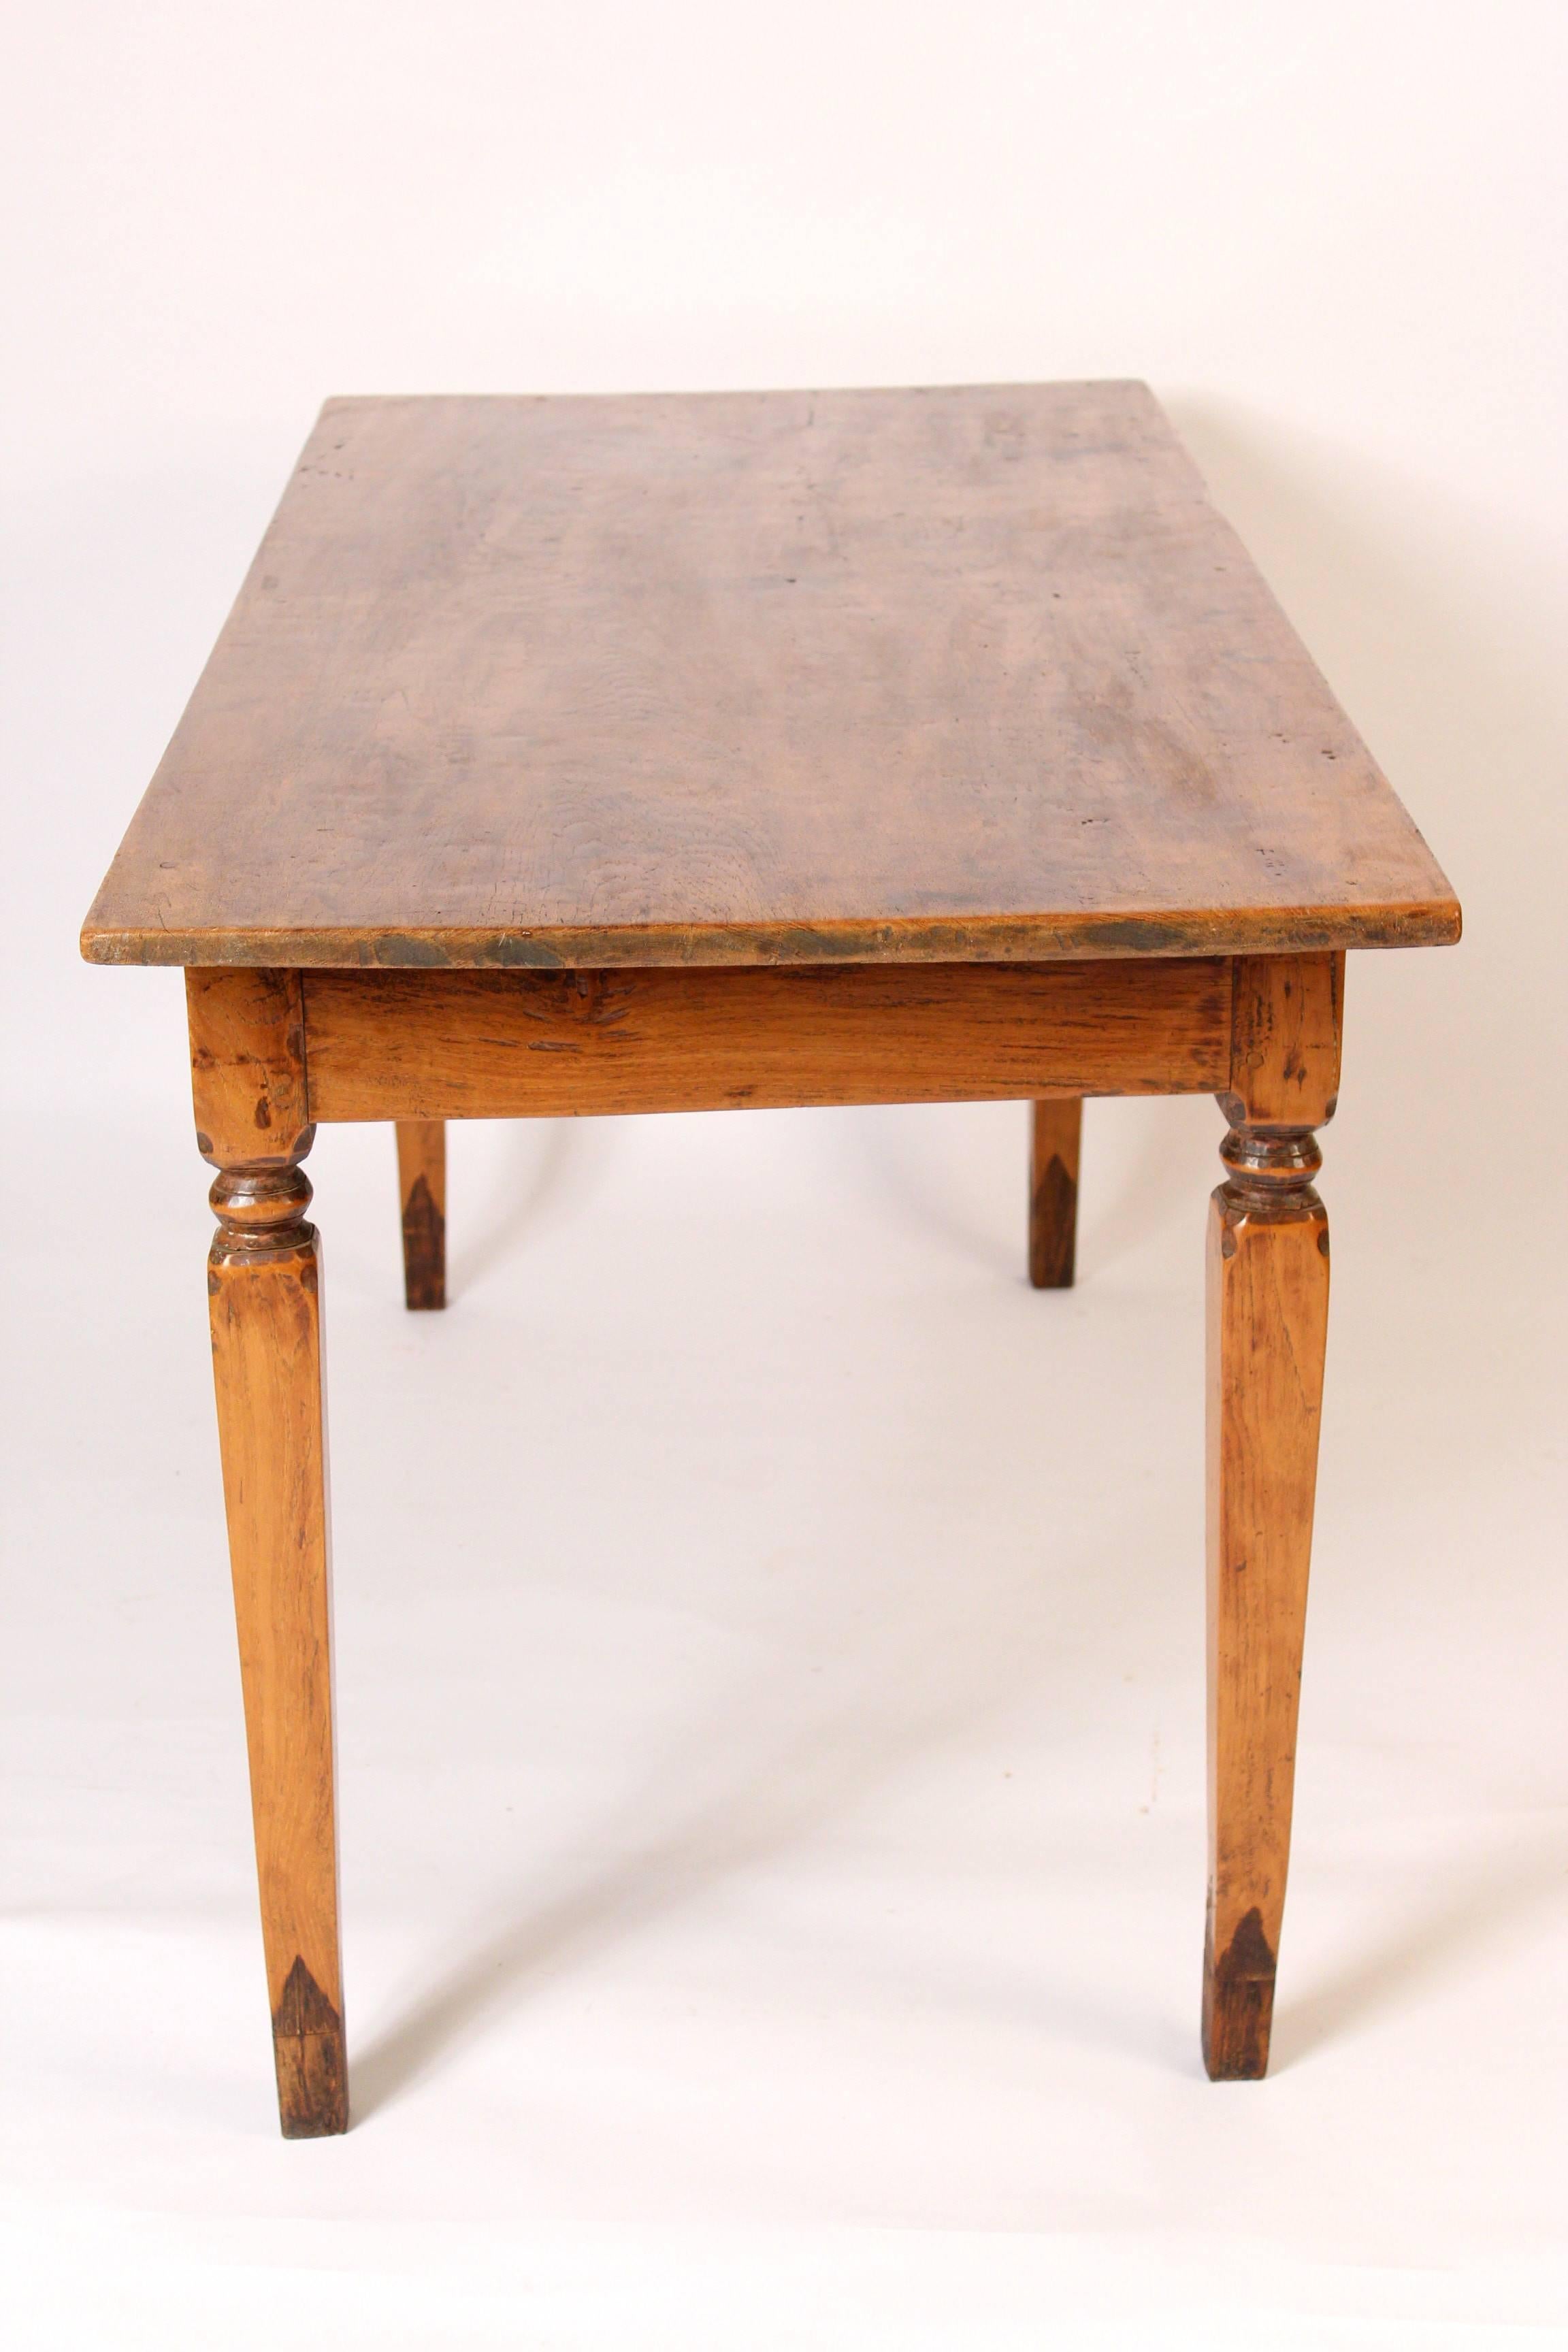 Antique French farm table with a single board top, late 19th century. The feet have been tipped. The wood on this table has excellent color / patina.